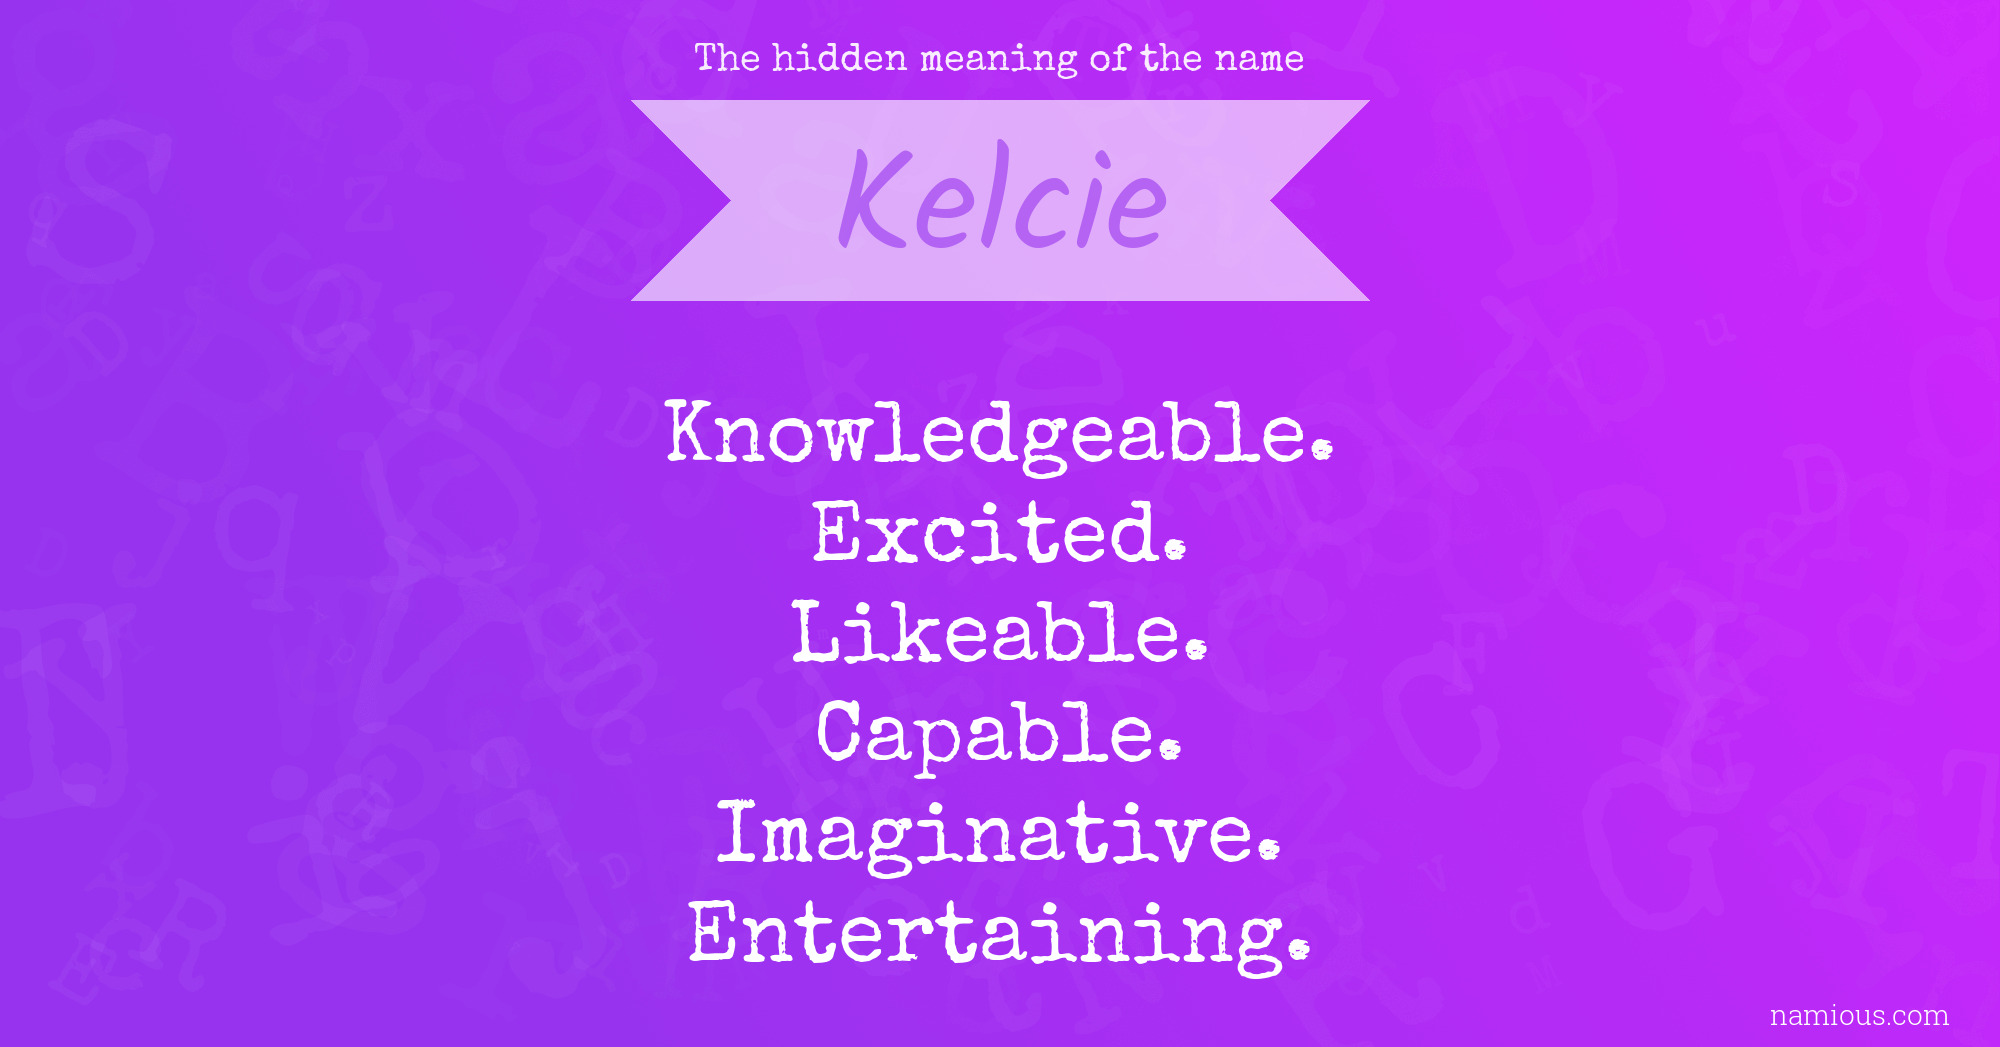 The hidden meaning of the name Kelcie